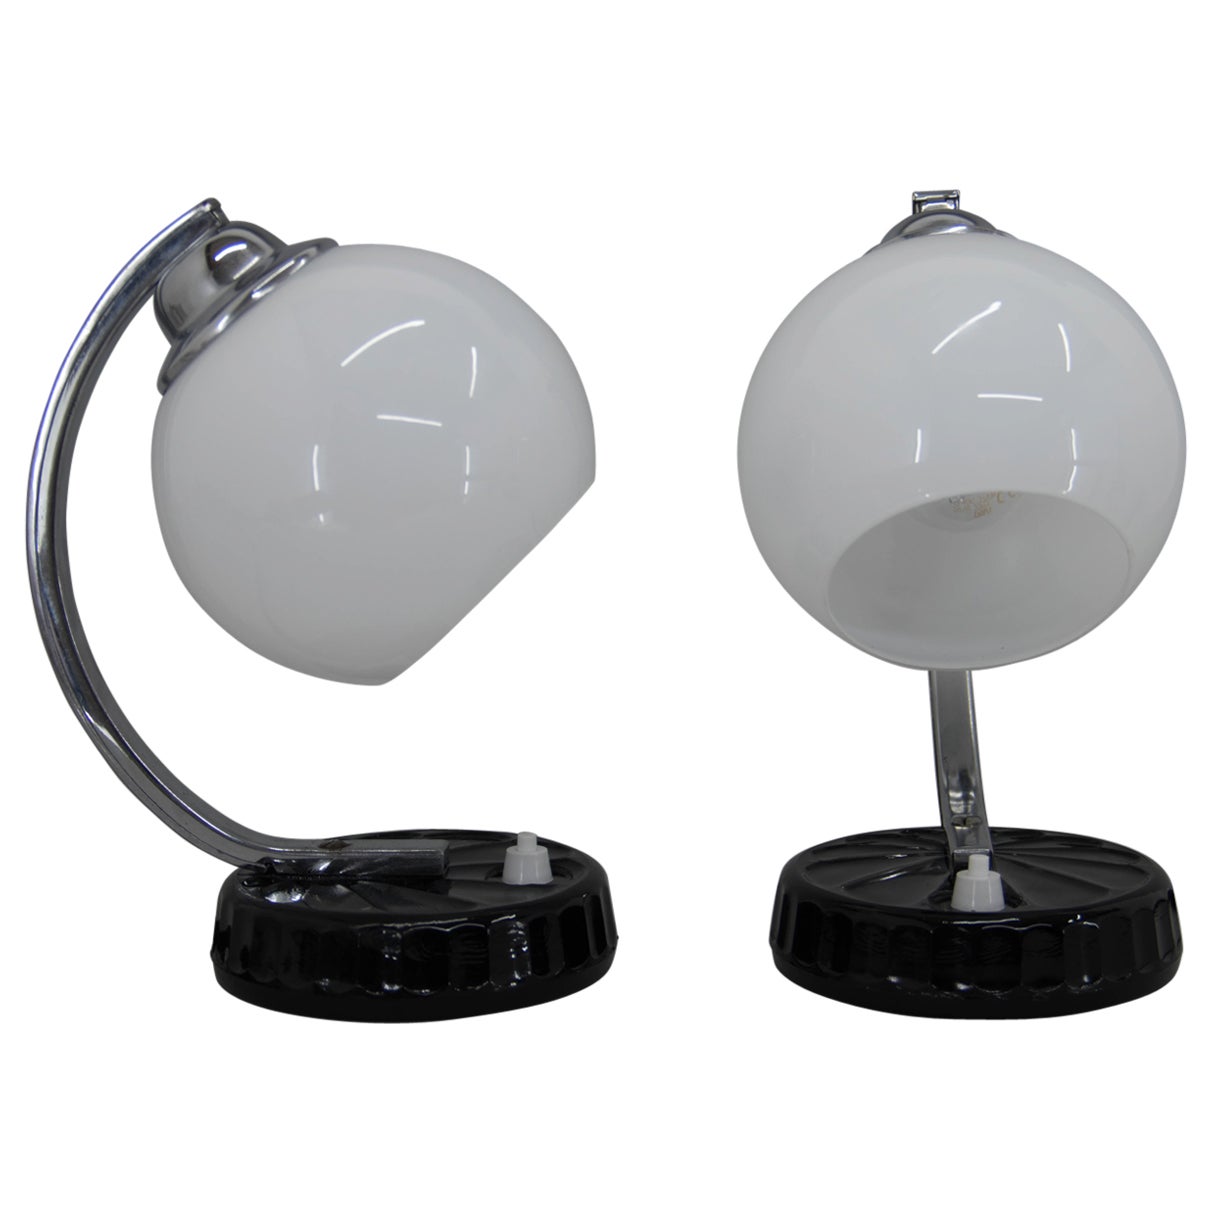 Set of Two Art Deco Table Lamps, 1930s